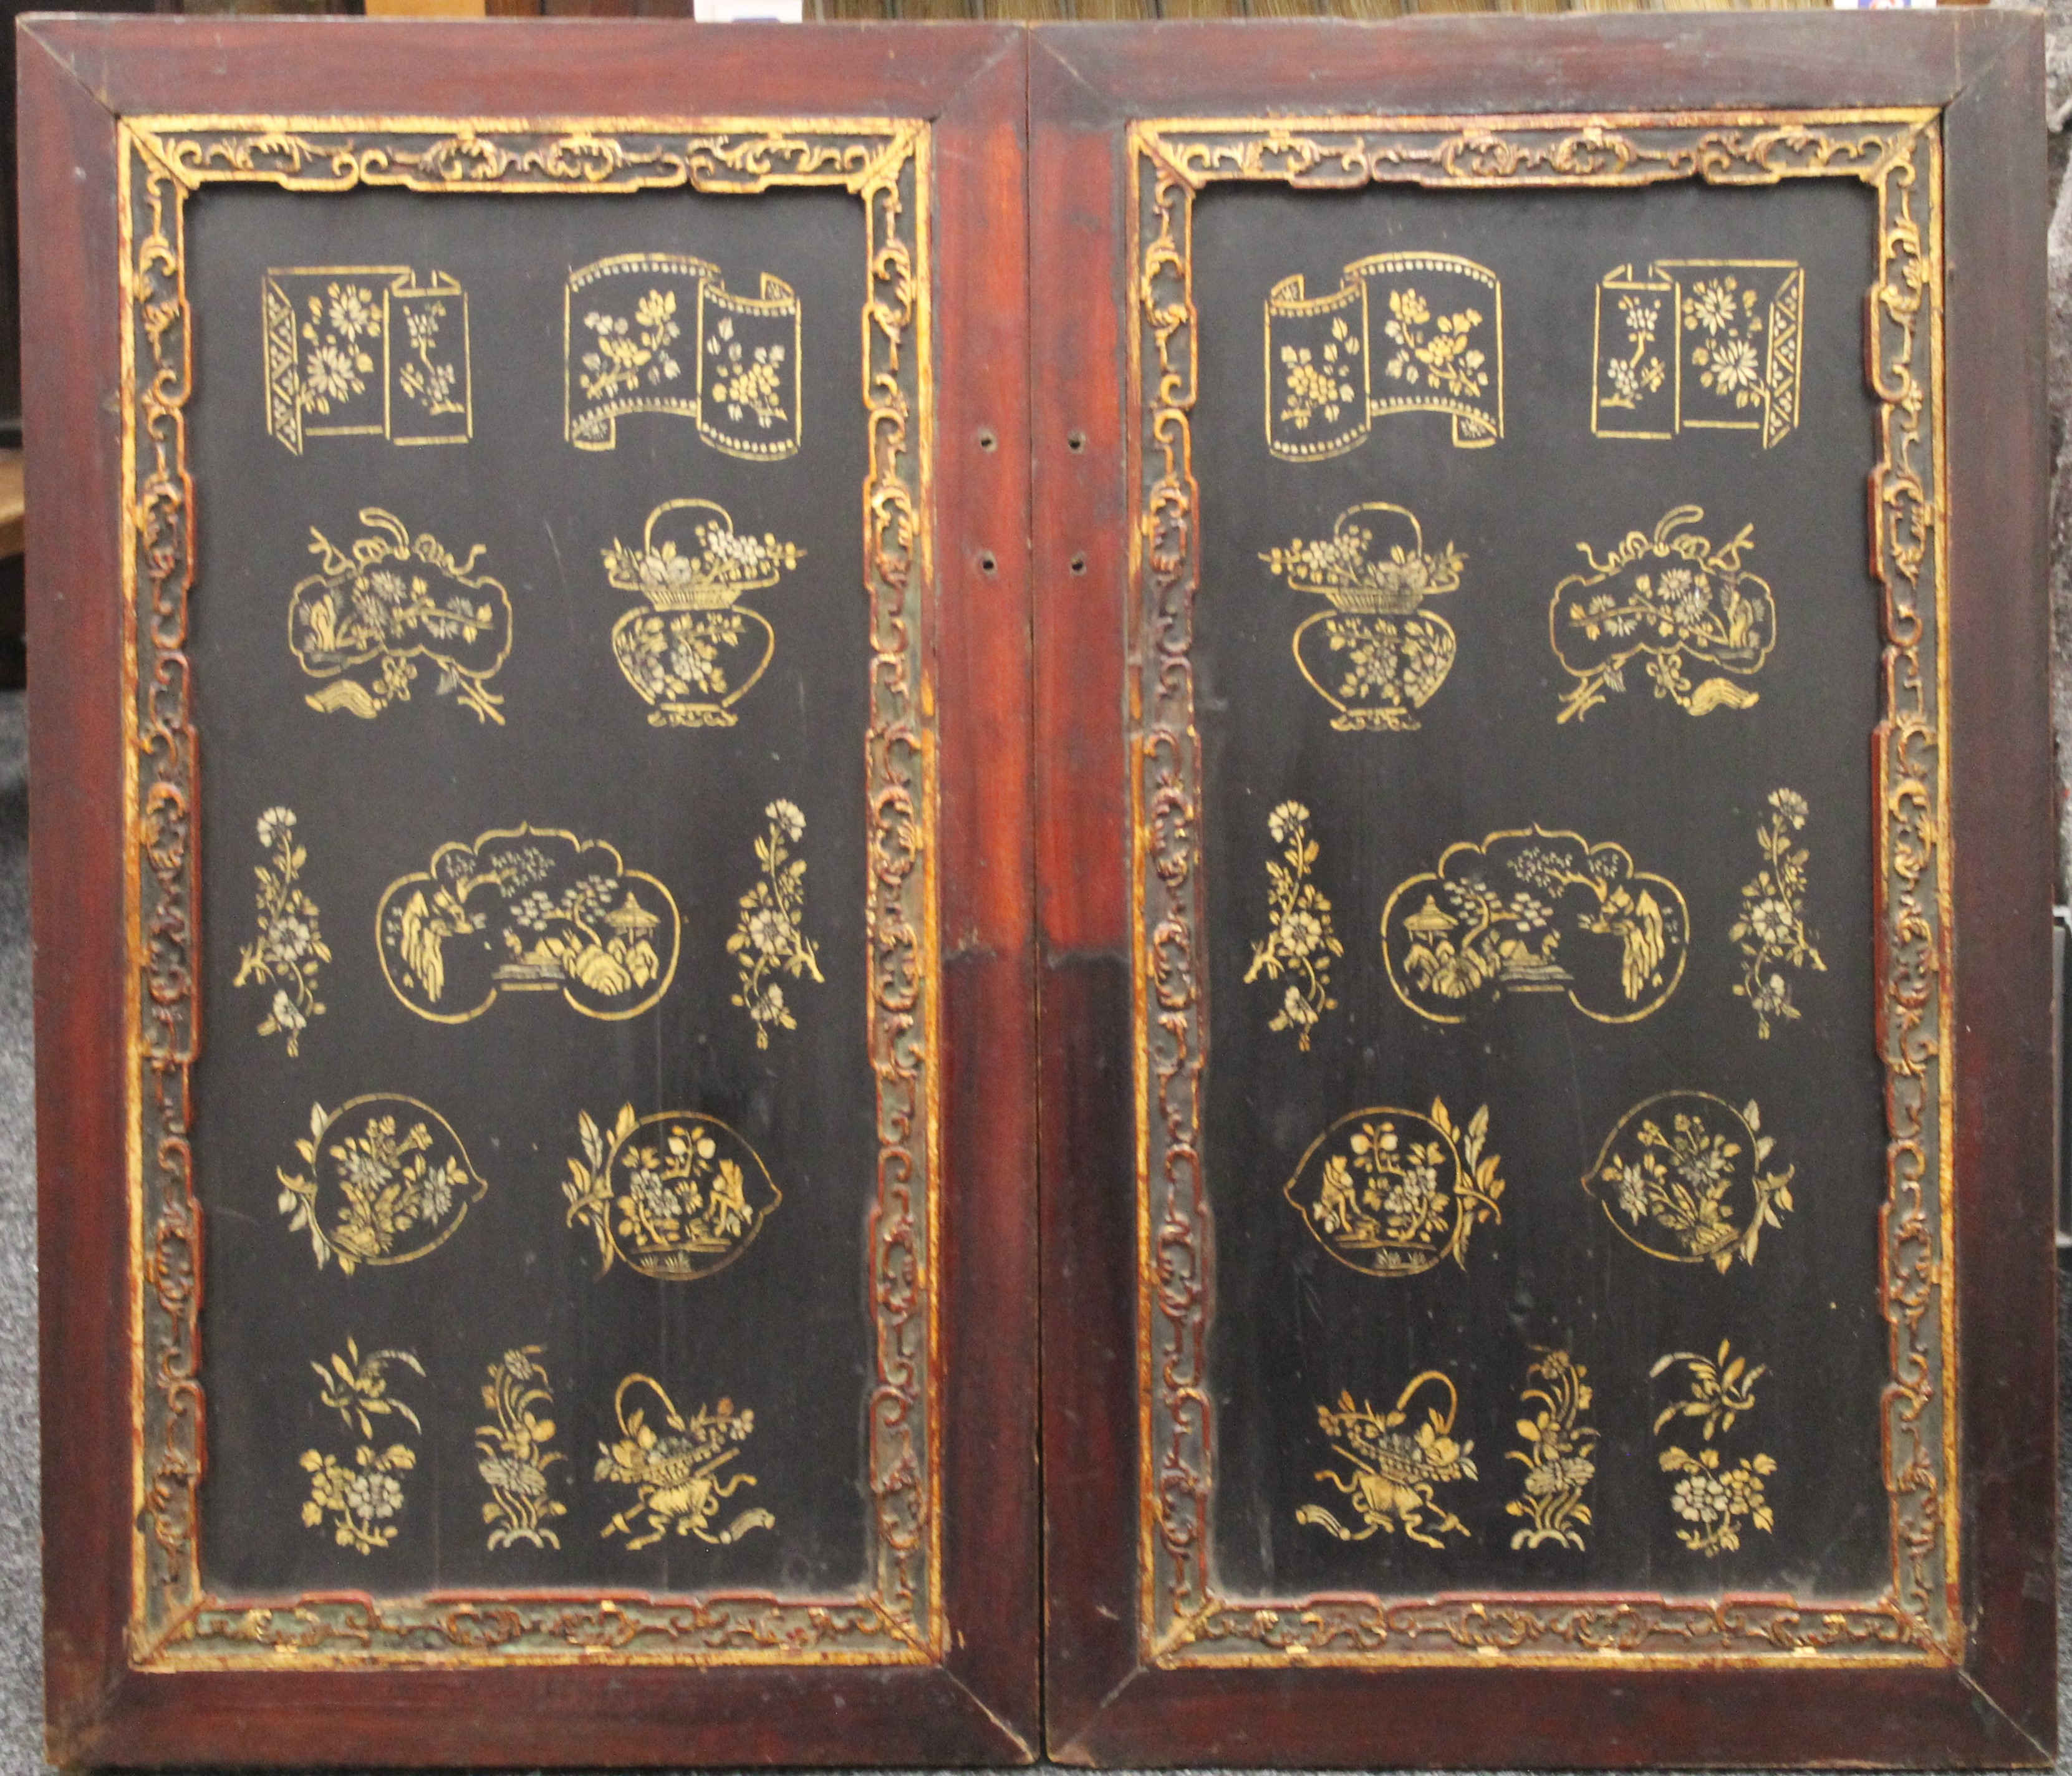 A pair of Chinese lacquered door panels. Each 46 x 80 cm. - Image 2 of 5